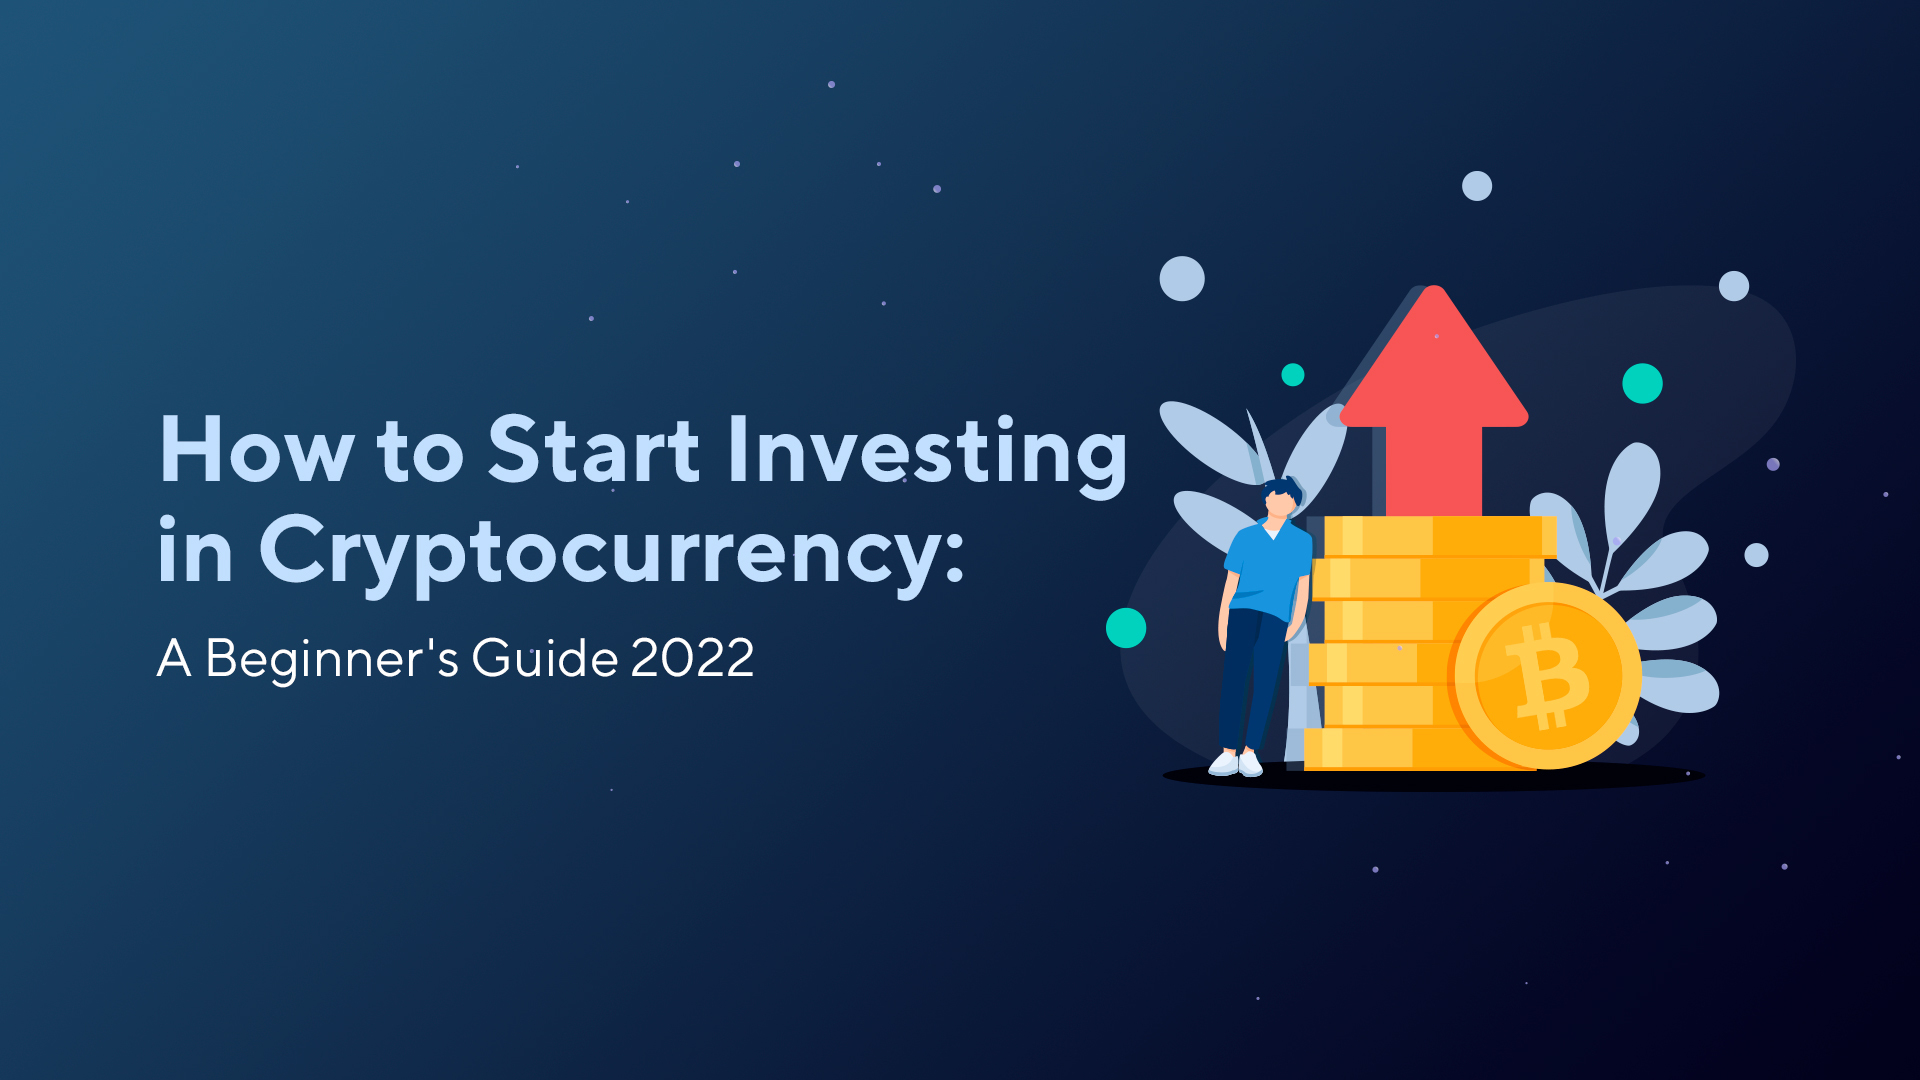 How to Start Investing in Cryptocurrency: A Beginner’s Guide 2022